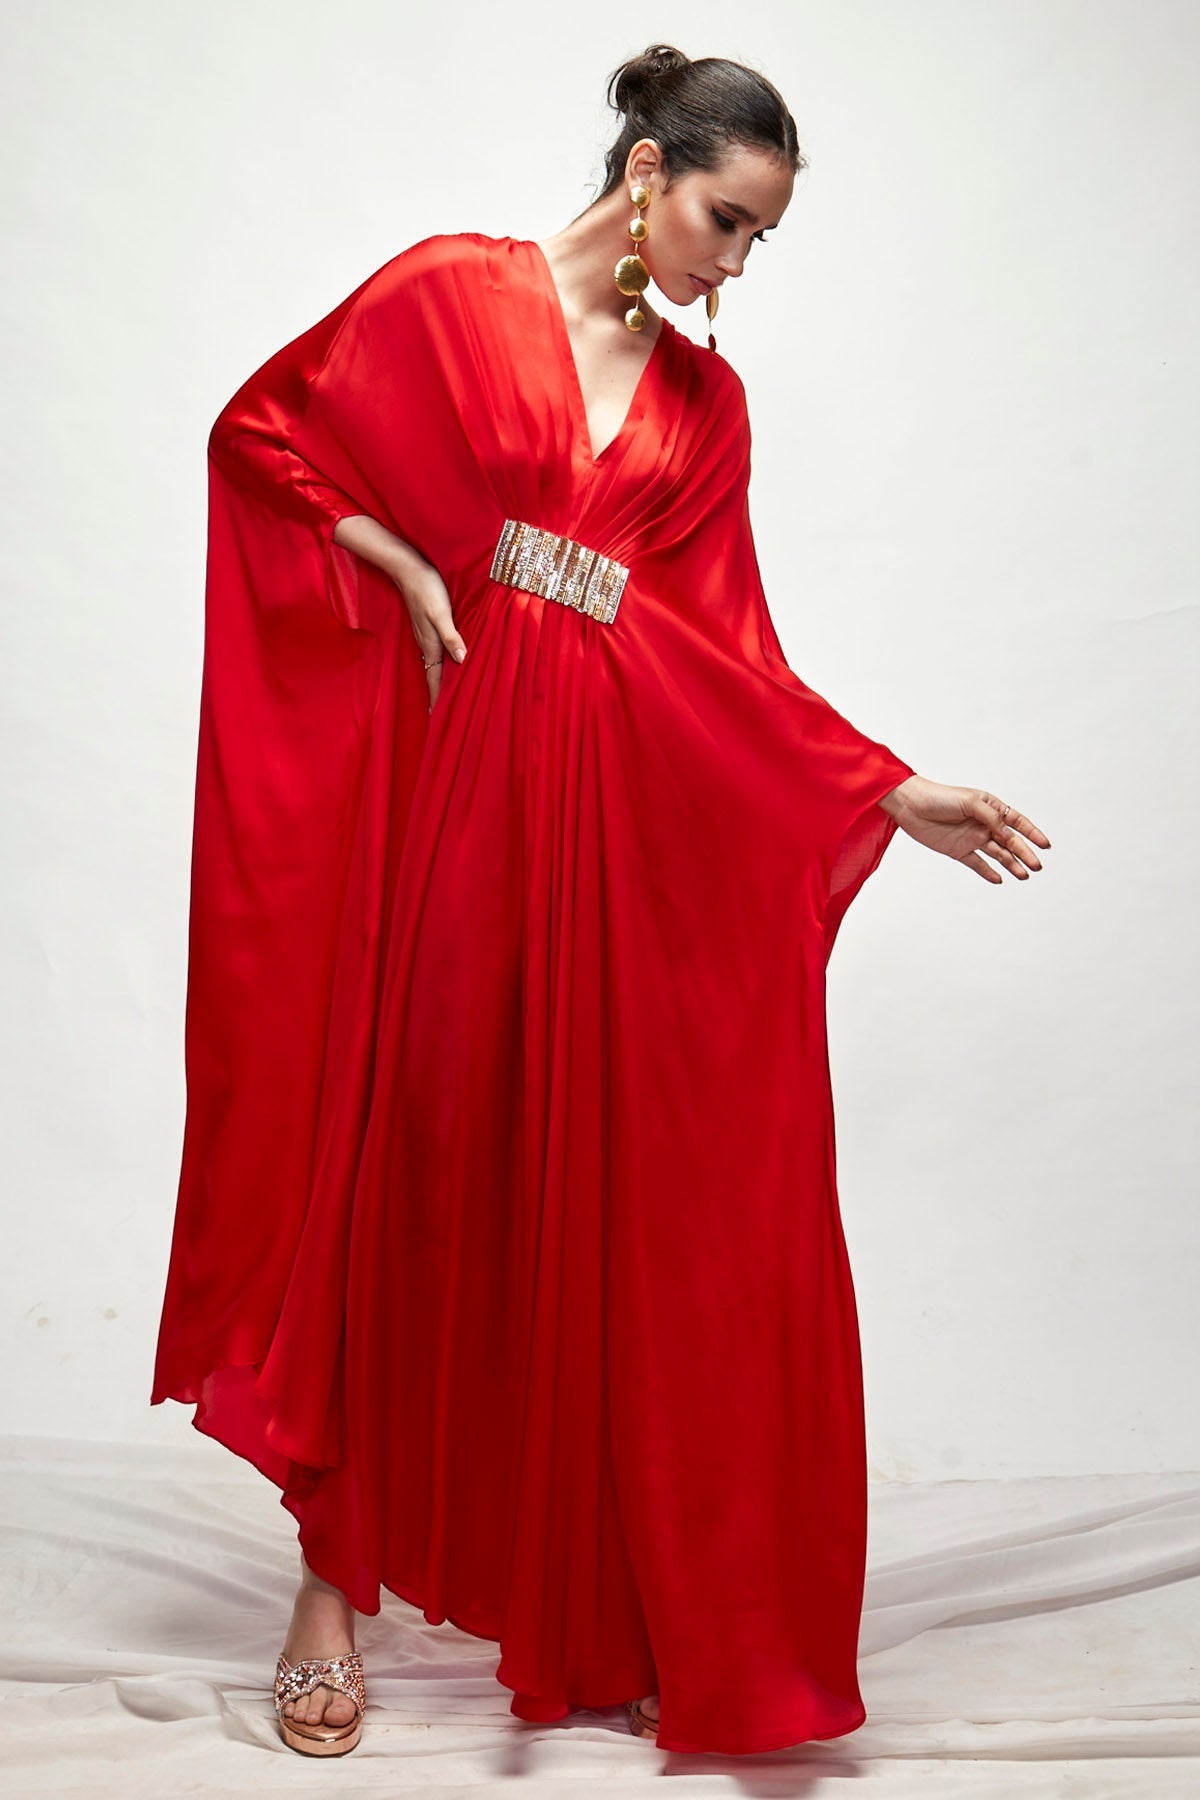 Designer Ranian Red silk kaftan with front pleat detailing and beads embroidery For women Online at ScrollnShops